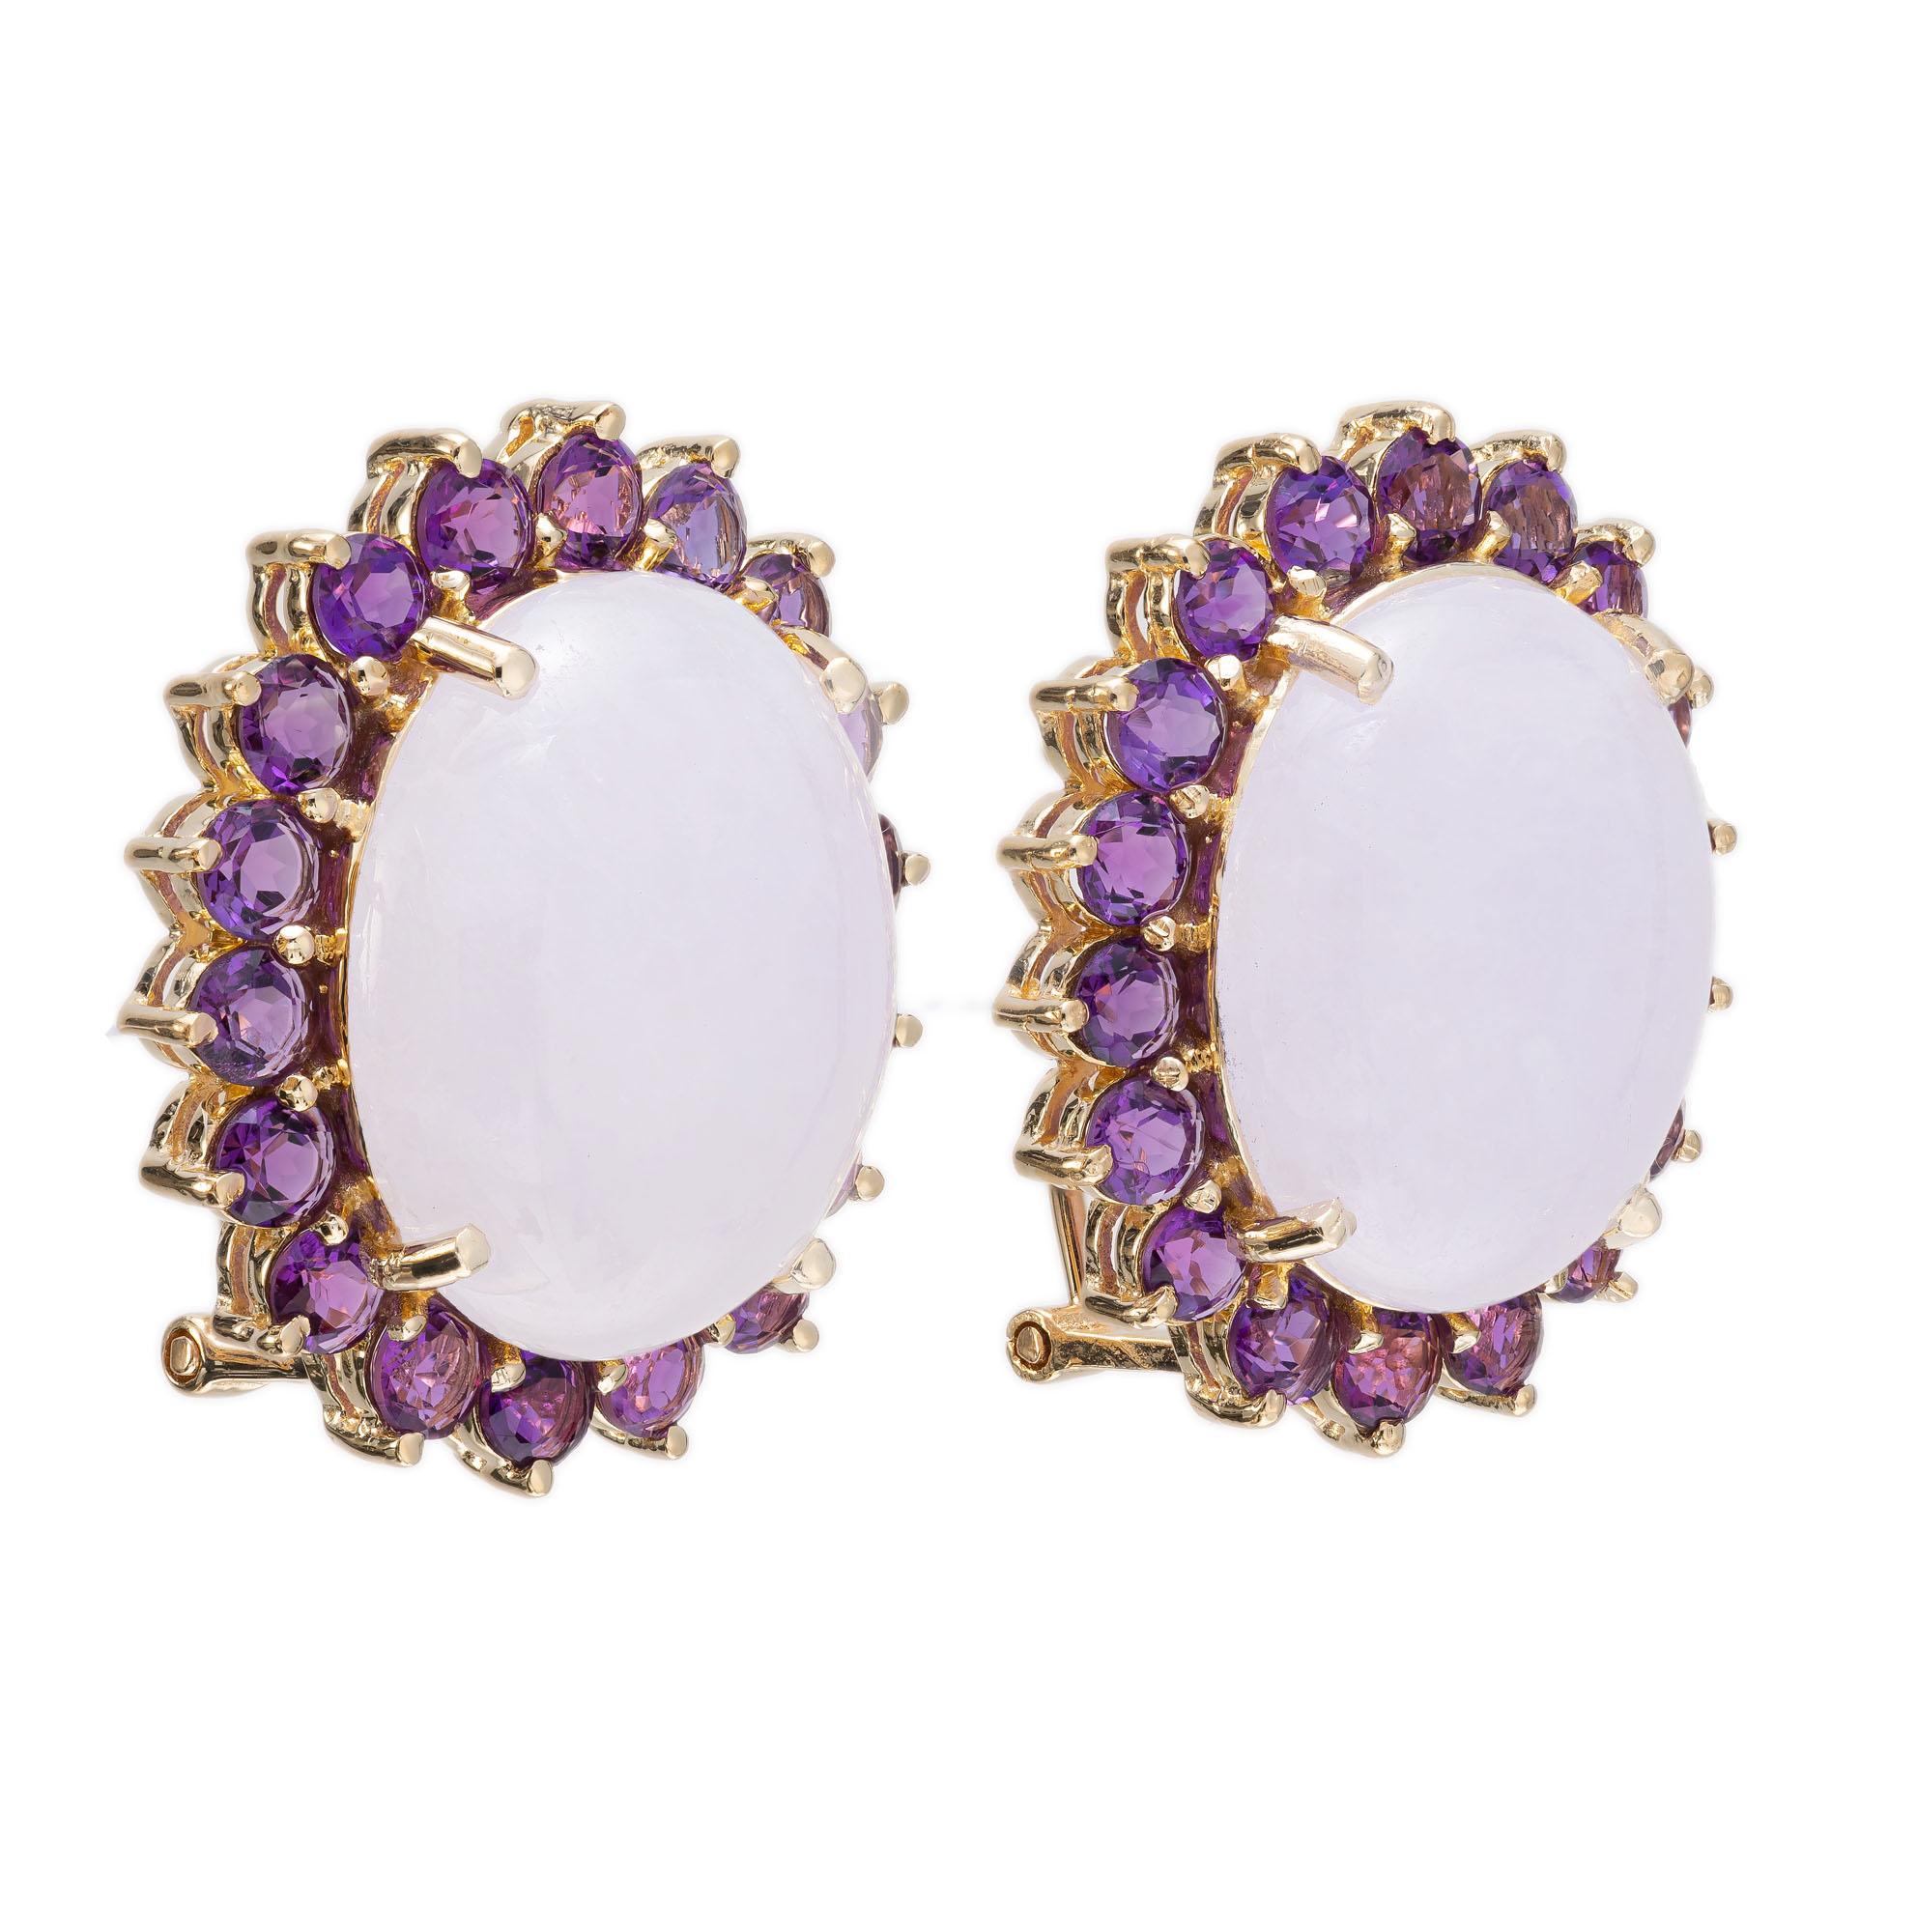 Jade and amethyst earrings. 2 round Light lavender Jadeite Jade stones with a halo of 36 round cut amethysts. 14k yellow gold.

2 oval cabochon lavender jadeite jade, approx. 26.00 carats
36 round purple amethyst, approx. 3.00cts
14k yellow